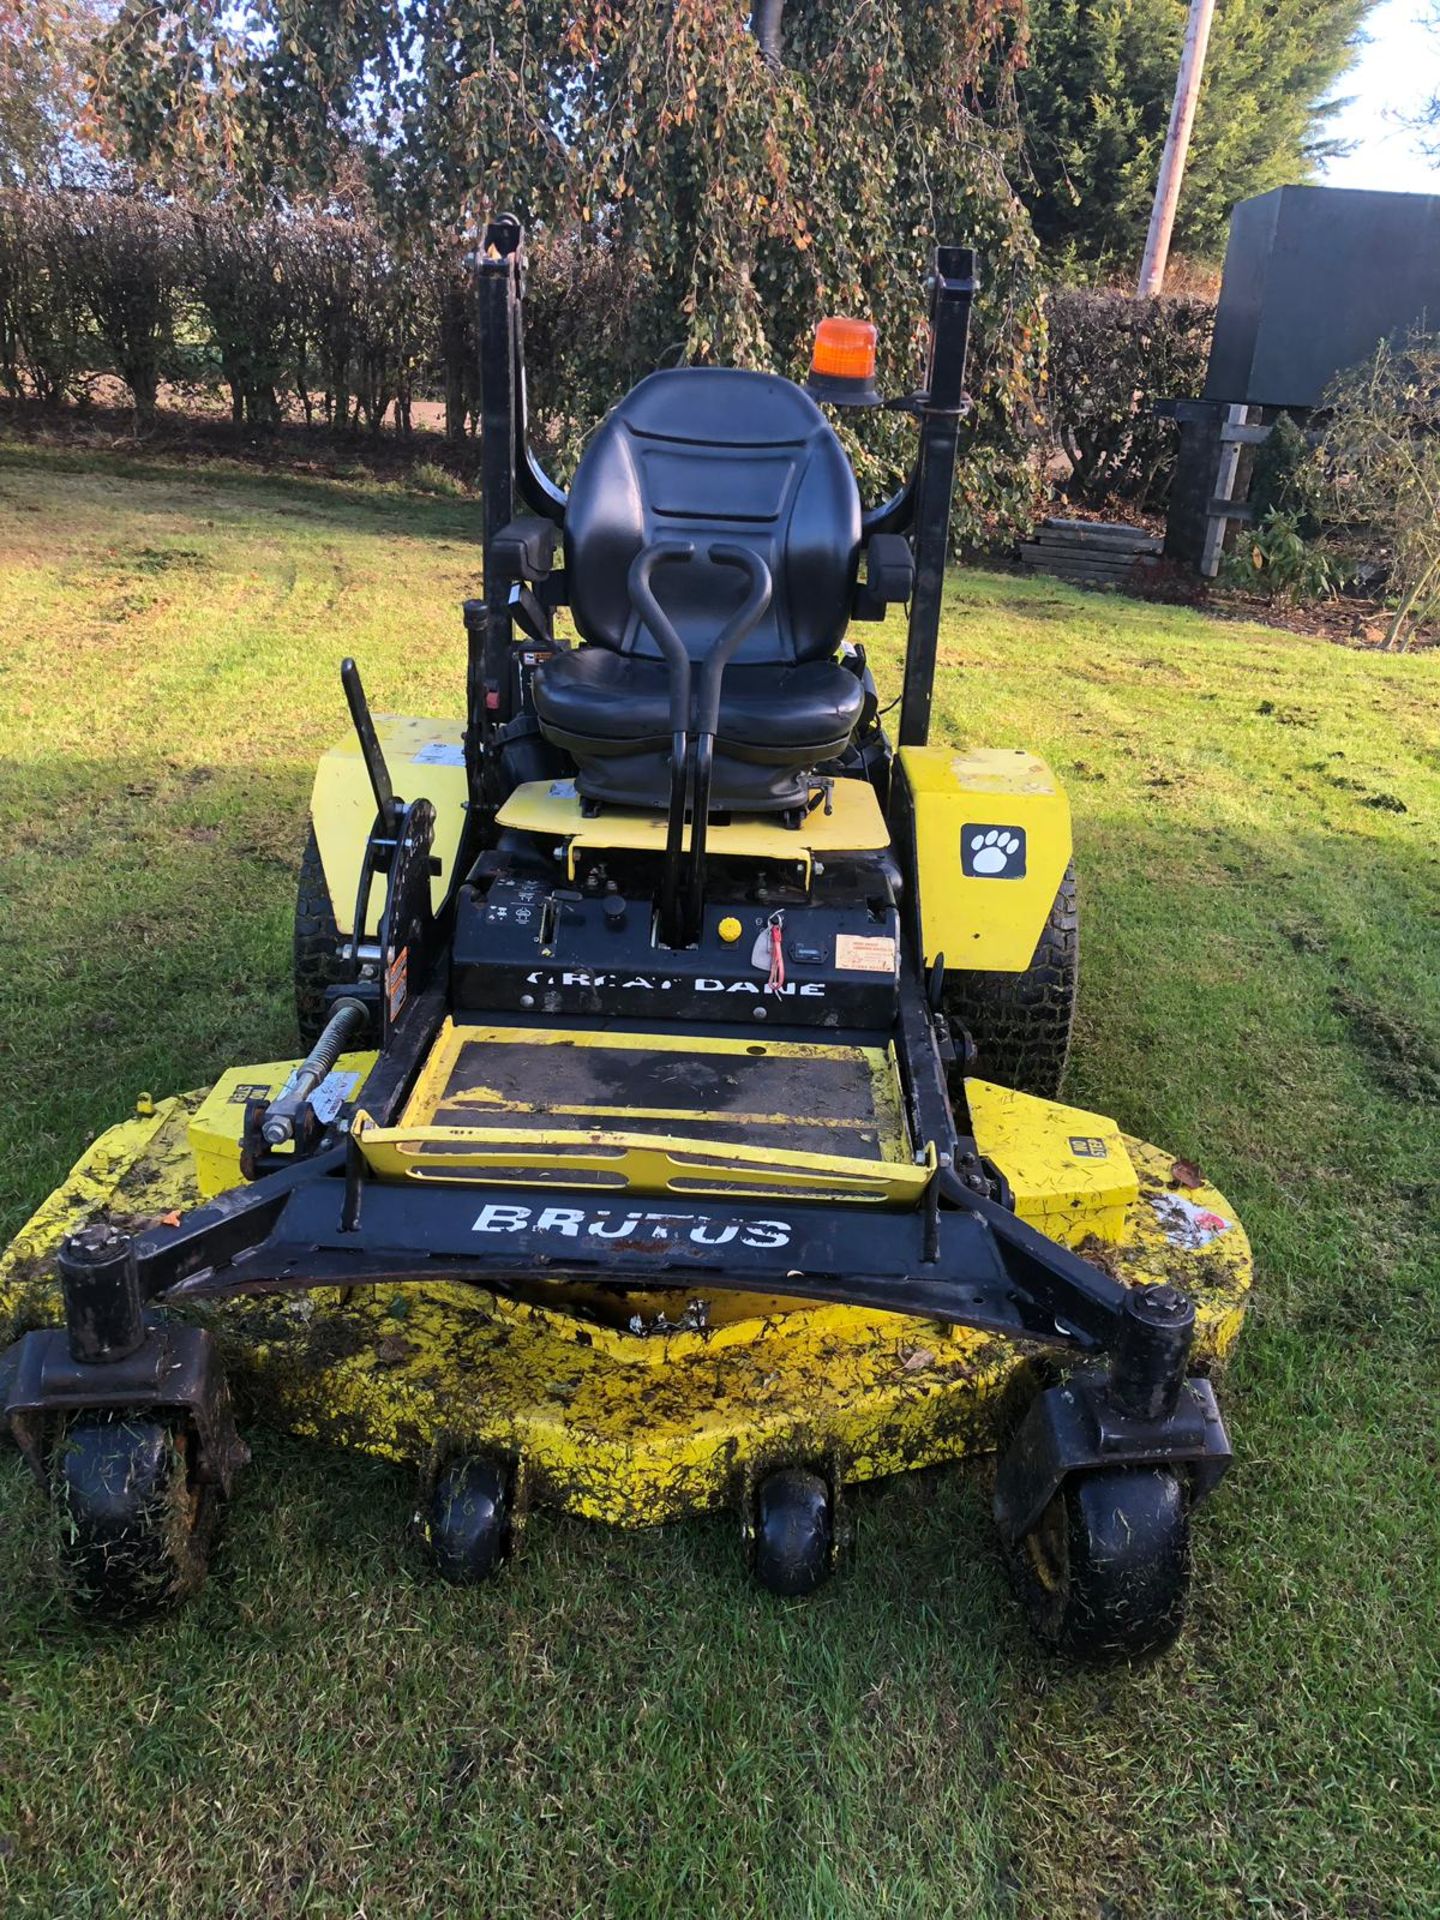 2012/12 REG GREAT DANE BRUTUS RIDE ON PETROL LAWN MOWER WITH DELUXE SEAT AND ROLL BAR *PLUS VAT* - Image 3 of 16